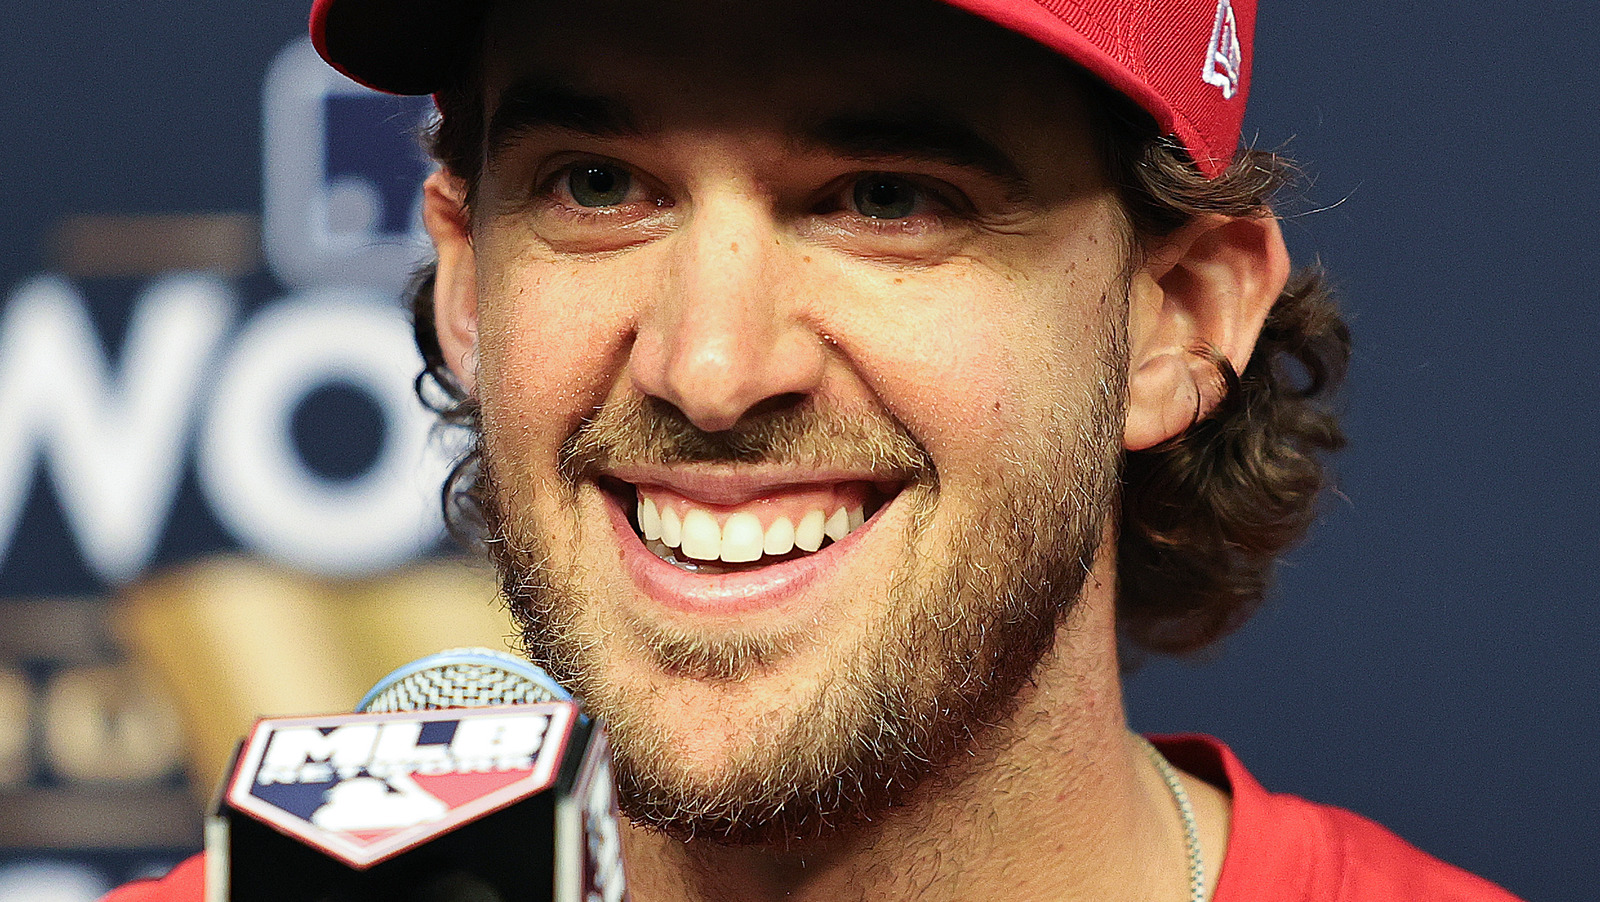 MLB: Is Aaron Nola Married? Wife/ Girlfriend and Parents